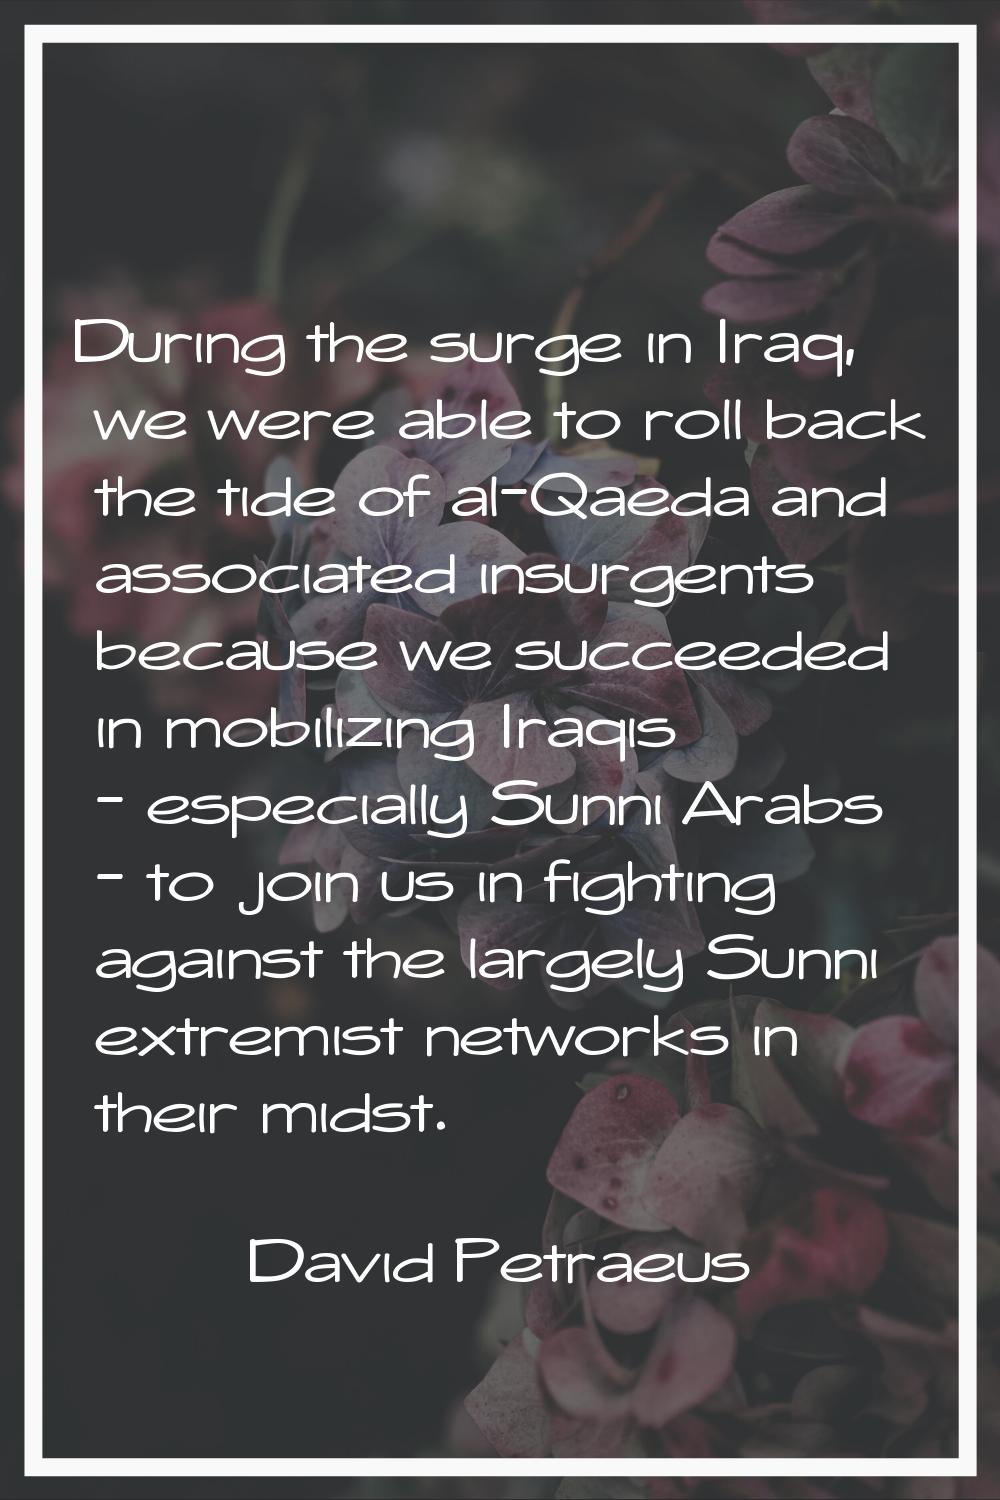 During the surge in Iraq, we were able to roll back the tide of al-Qaeda and associated insurgents 